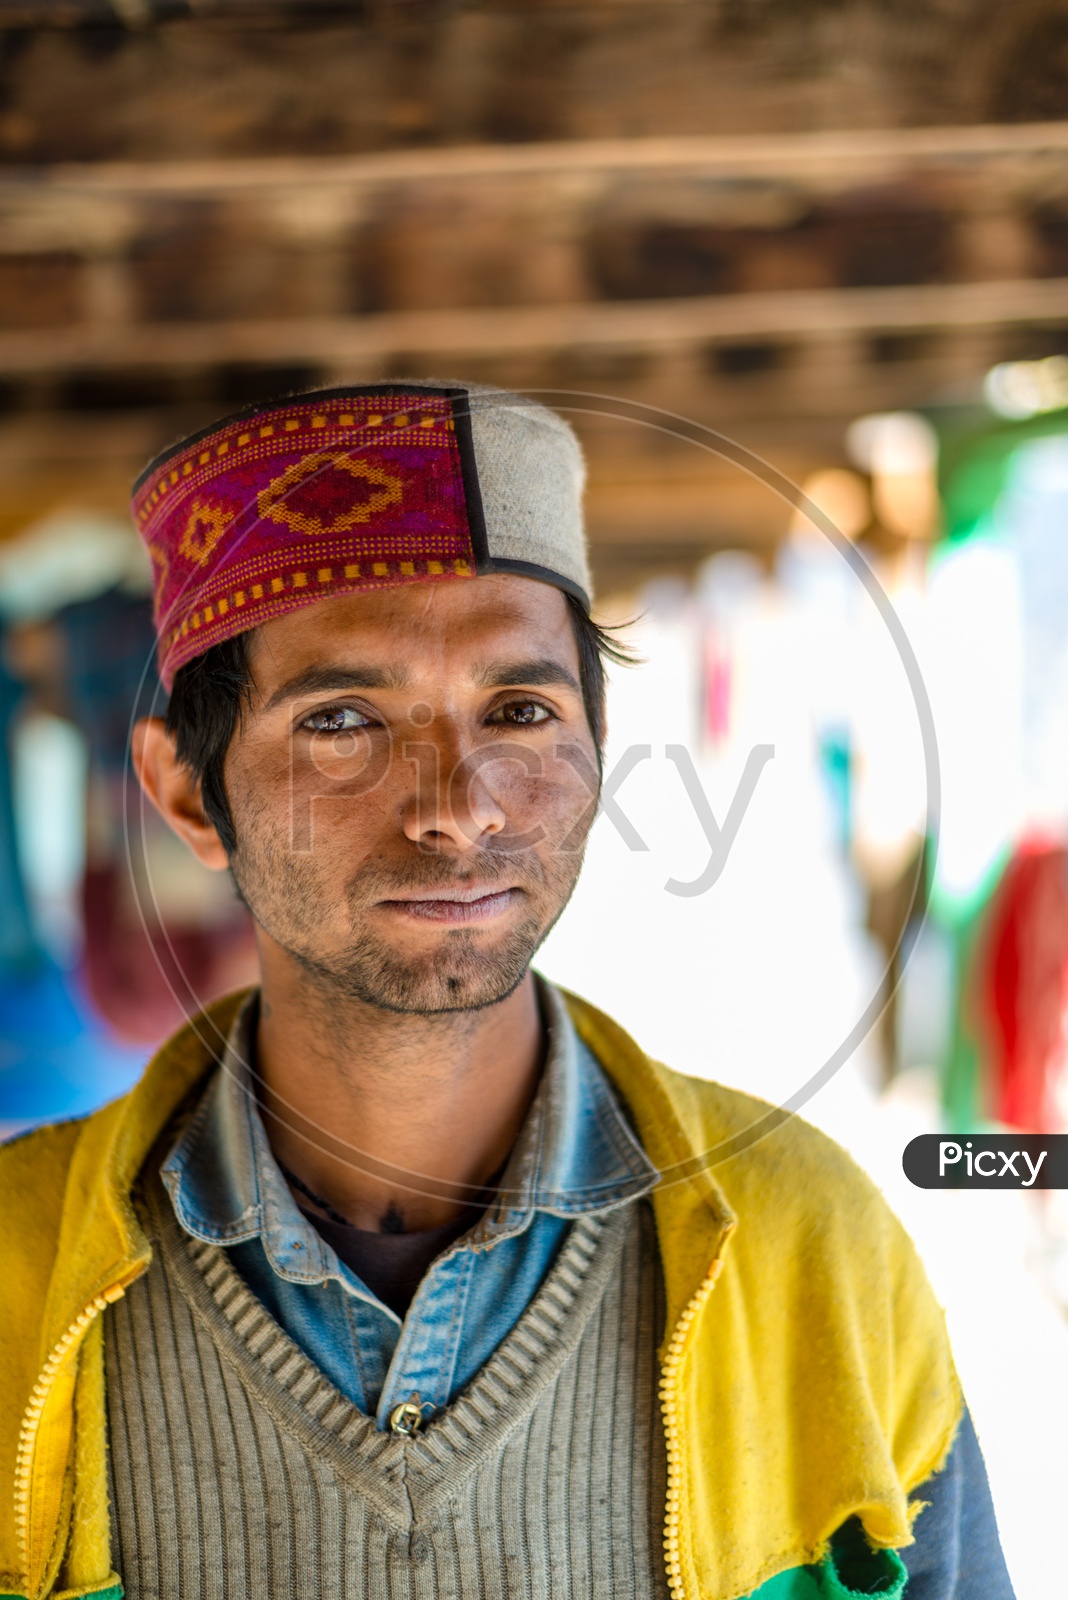 Image of Young Himachali Boy in Traditional Dress on the  Street-HE089254-Picxy